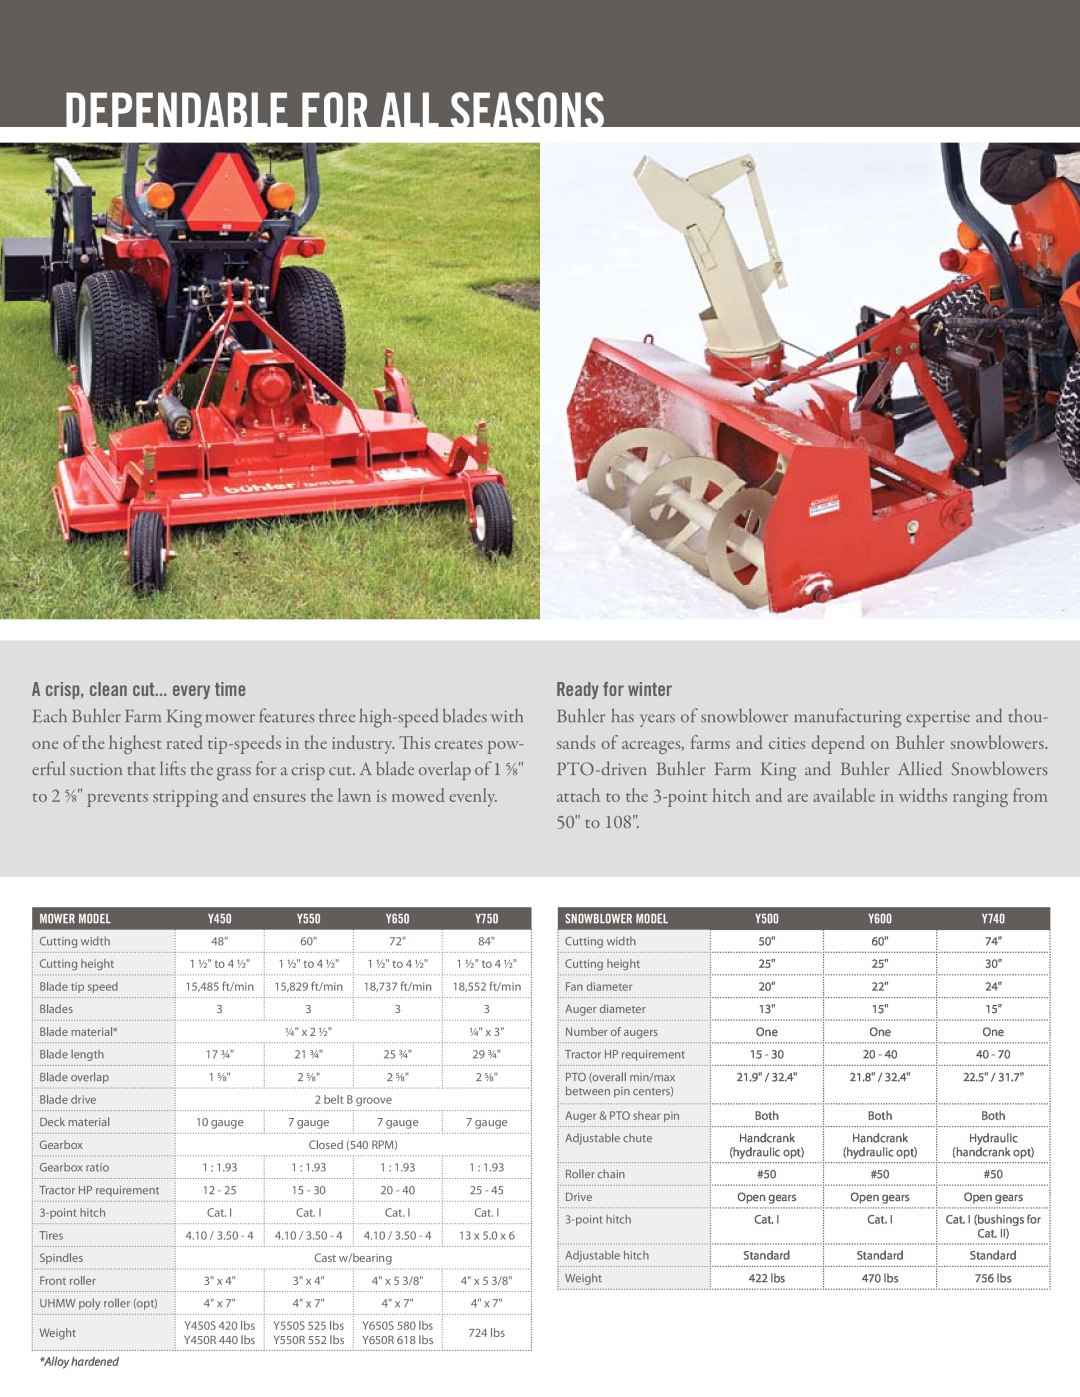 Buhler C8801, C8313, C72ss, C8317, C60ss, C84ss, C8800, C8315 manual dependable for all seasons, Ready for winter 